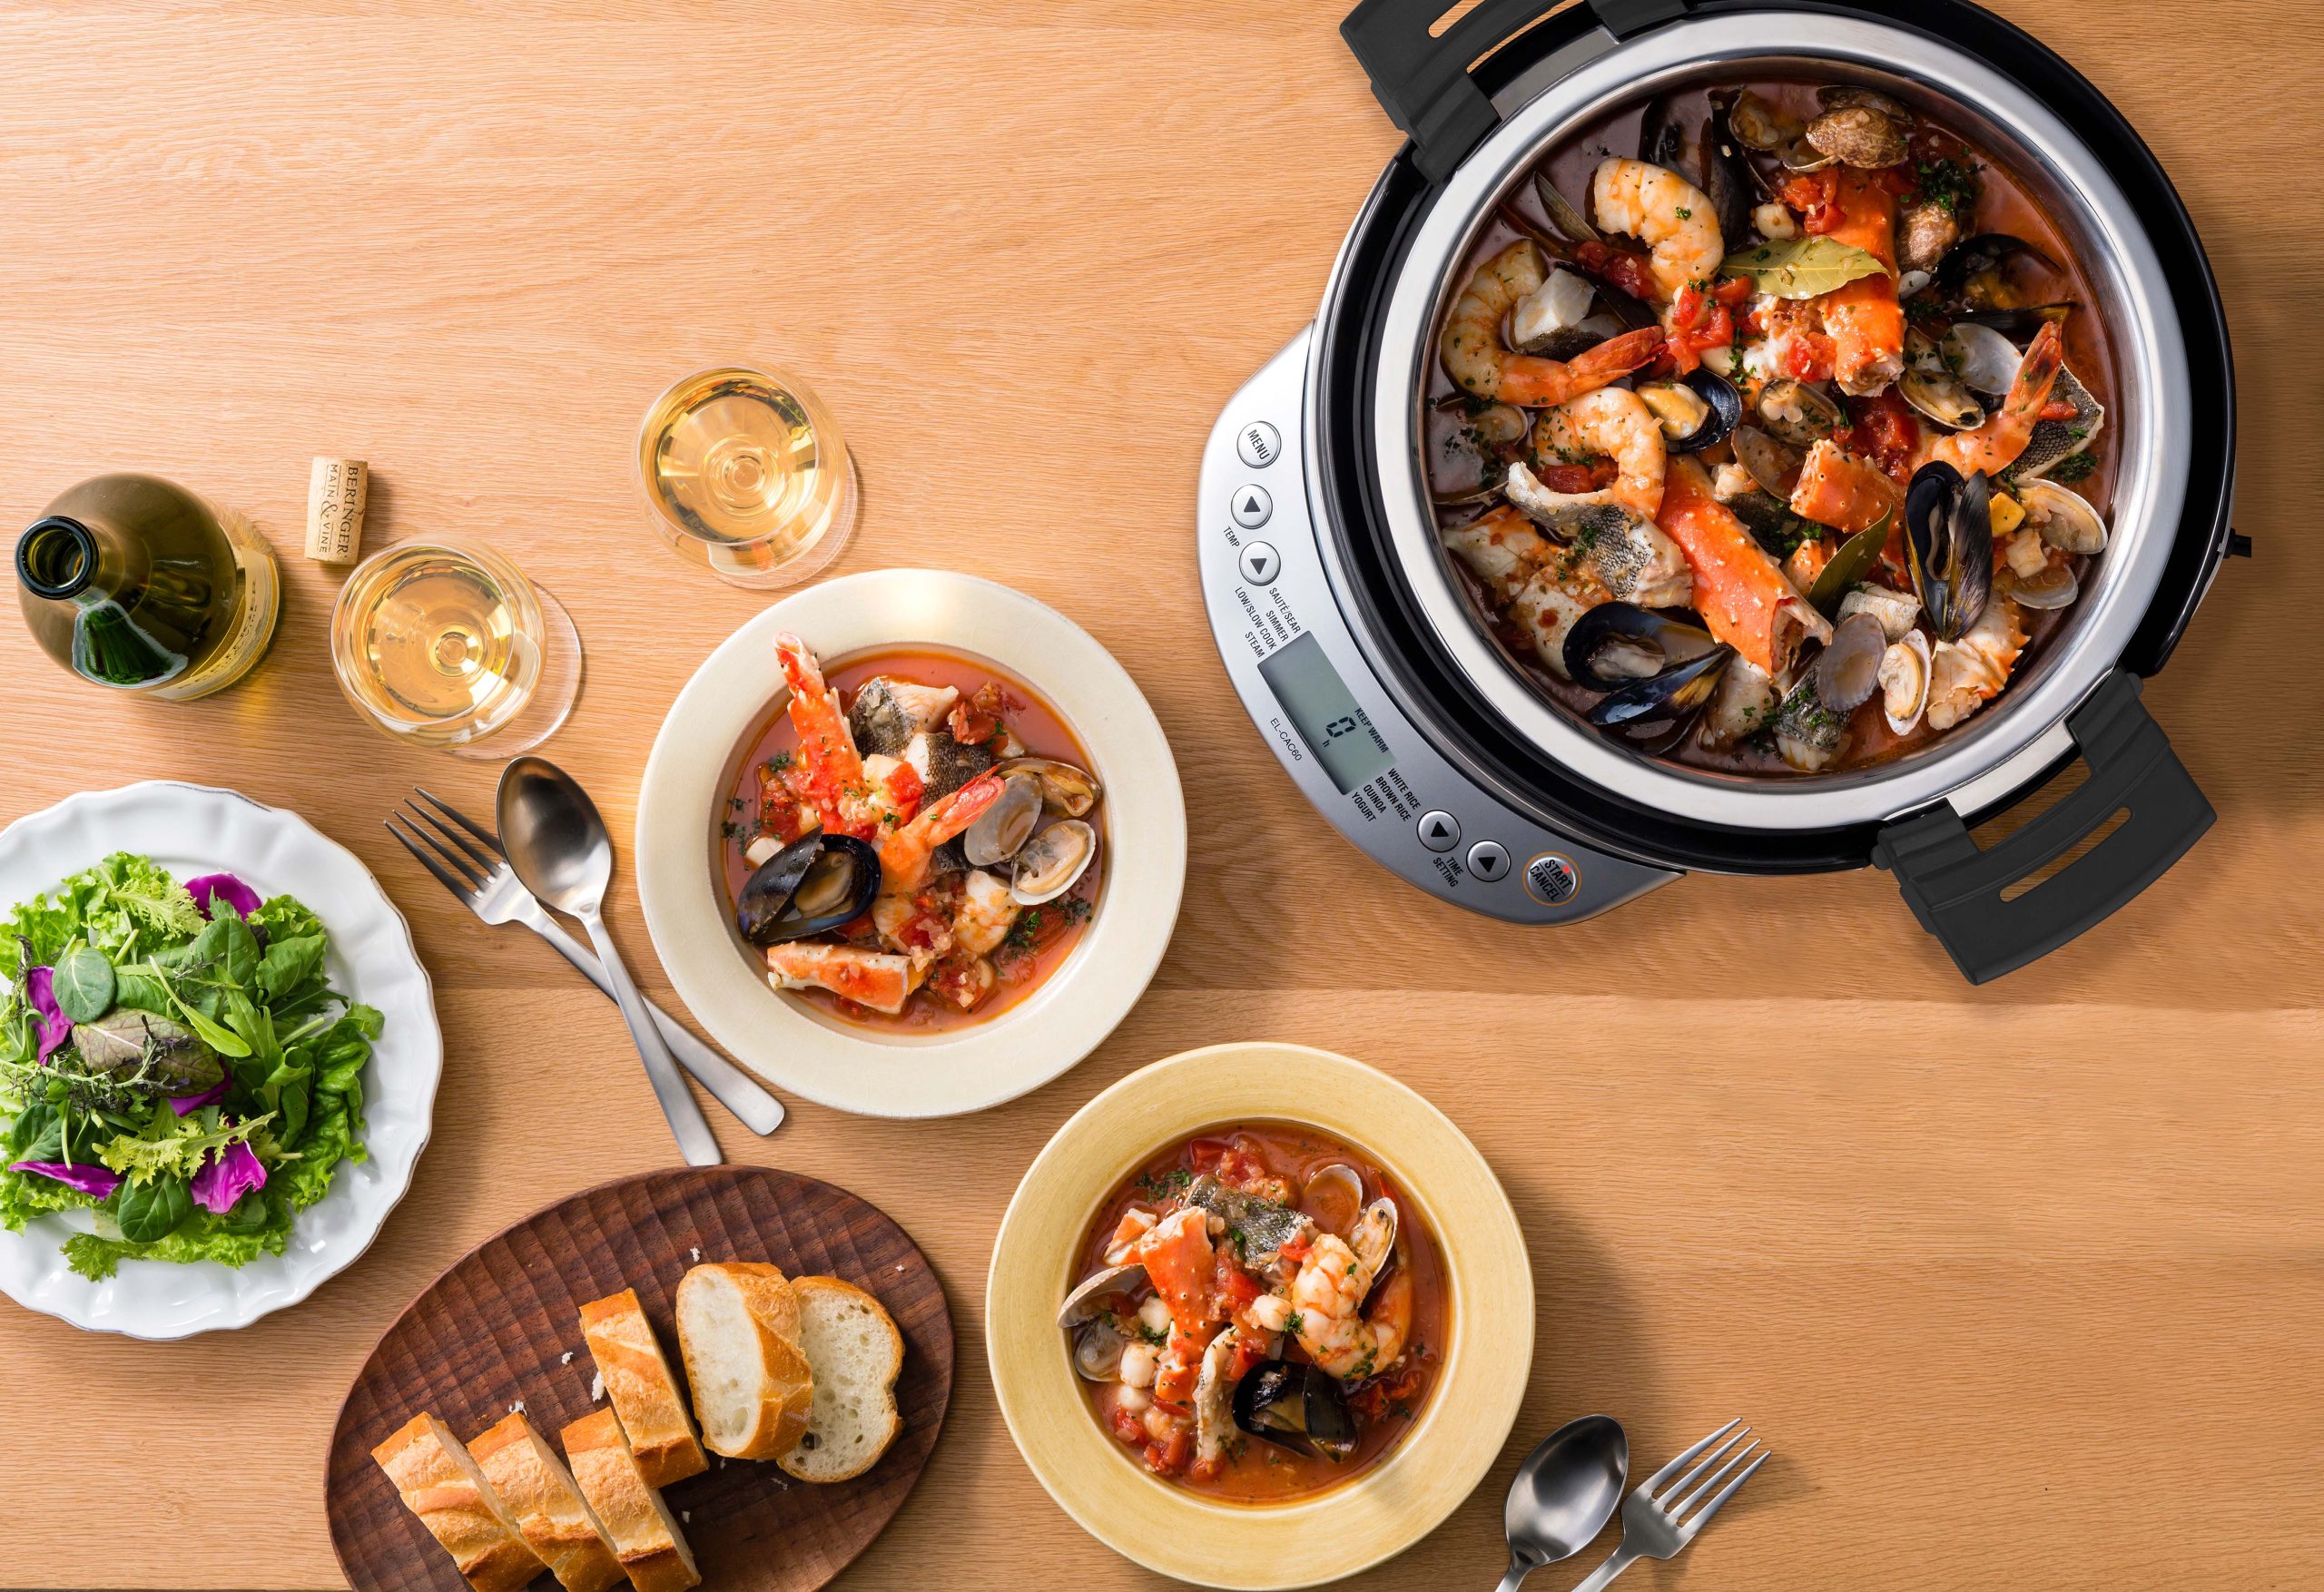 Zojirushi Multicooker EL-CAC60 Review: A Great Instant Pot